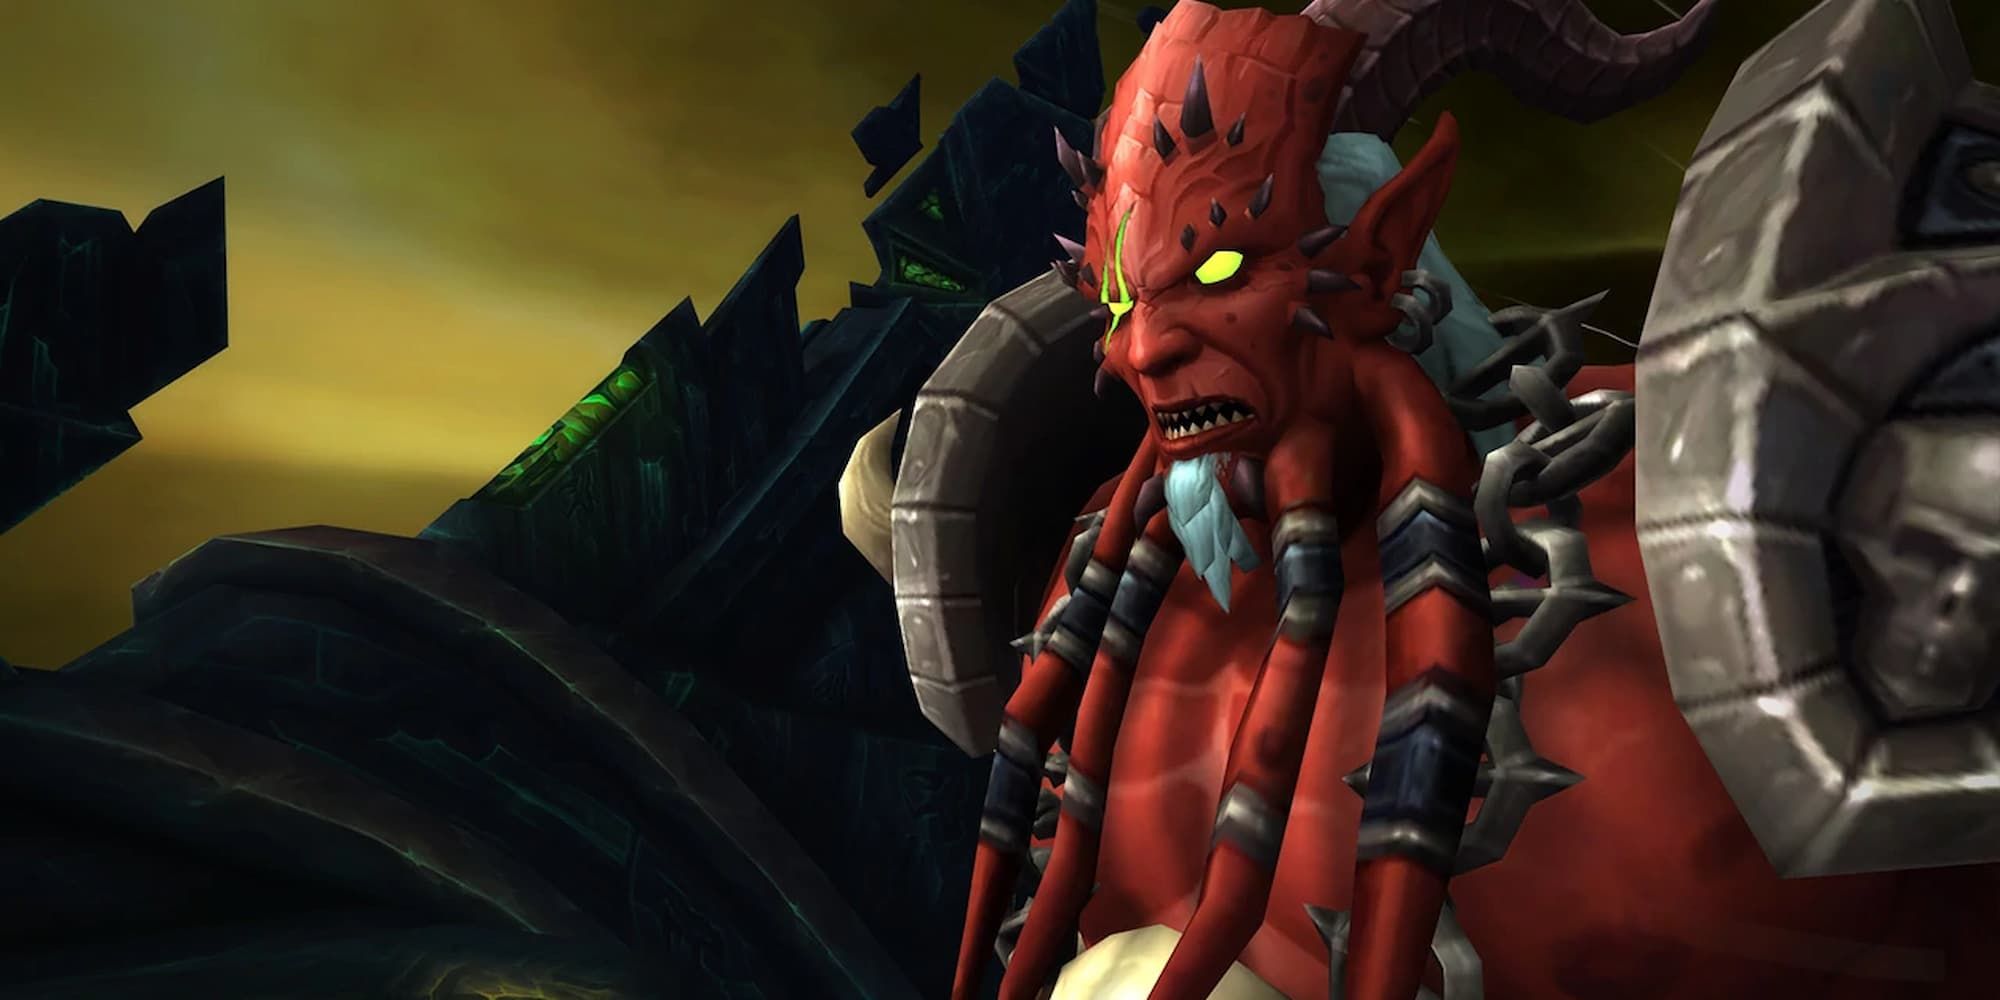 Kil'Jaeden stares outward with a look of anger on his face.